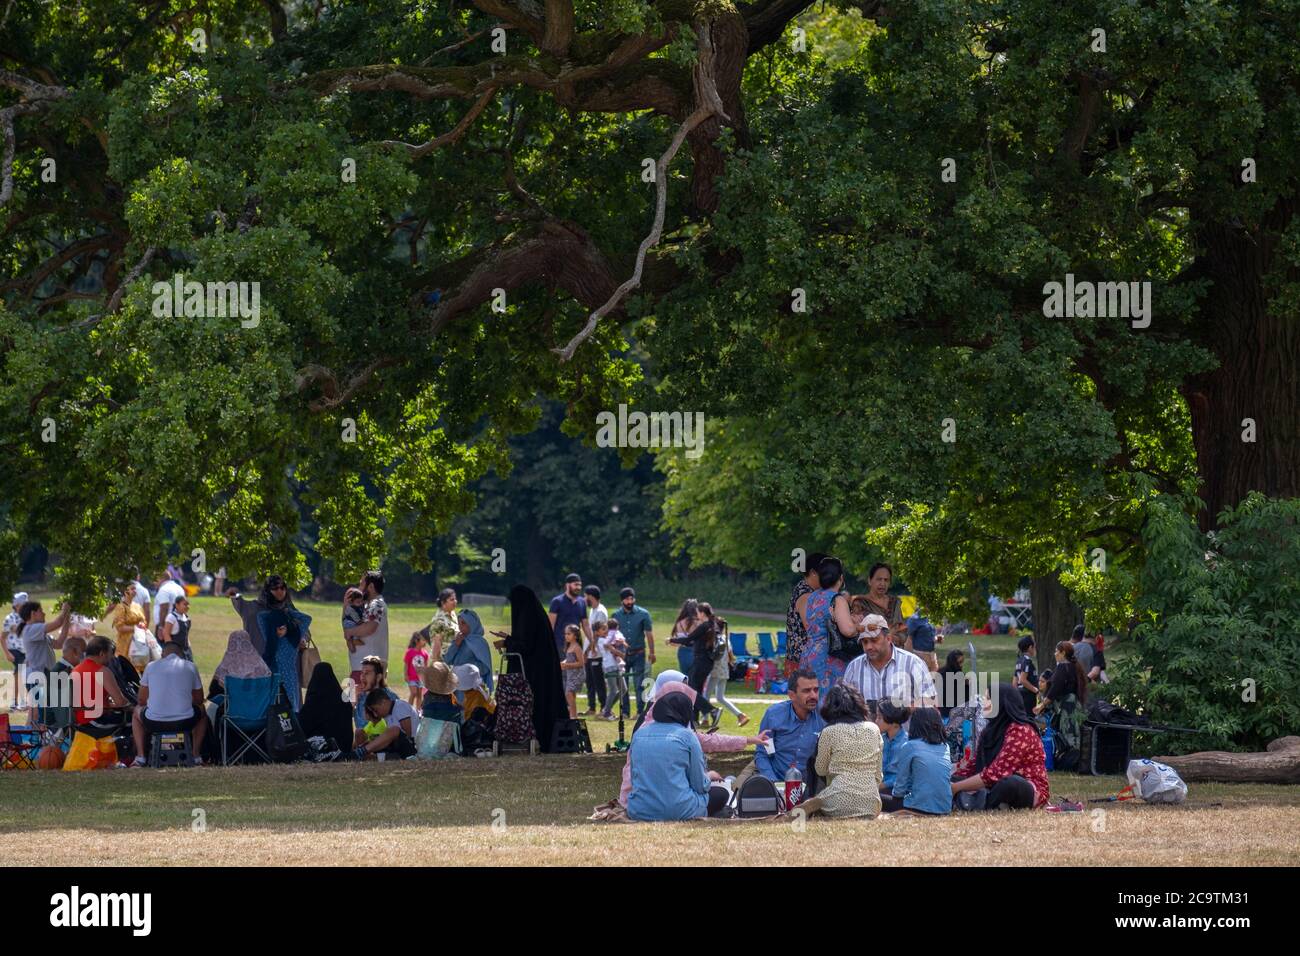 Watford, Hertfordshire, UK. 2 August 2020. Busy Sunday afternoon of picnics in Cassiobury Park, the largest public open space in Watford. Stock Photo